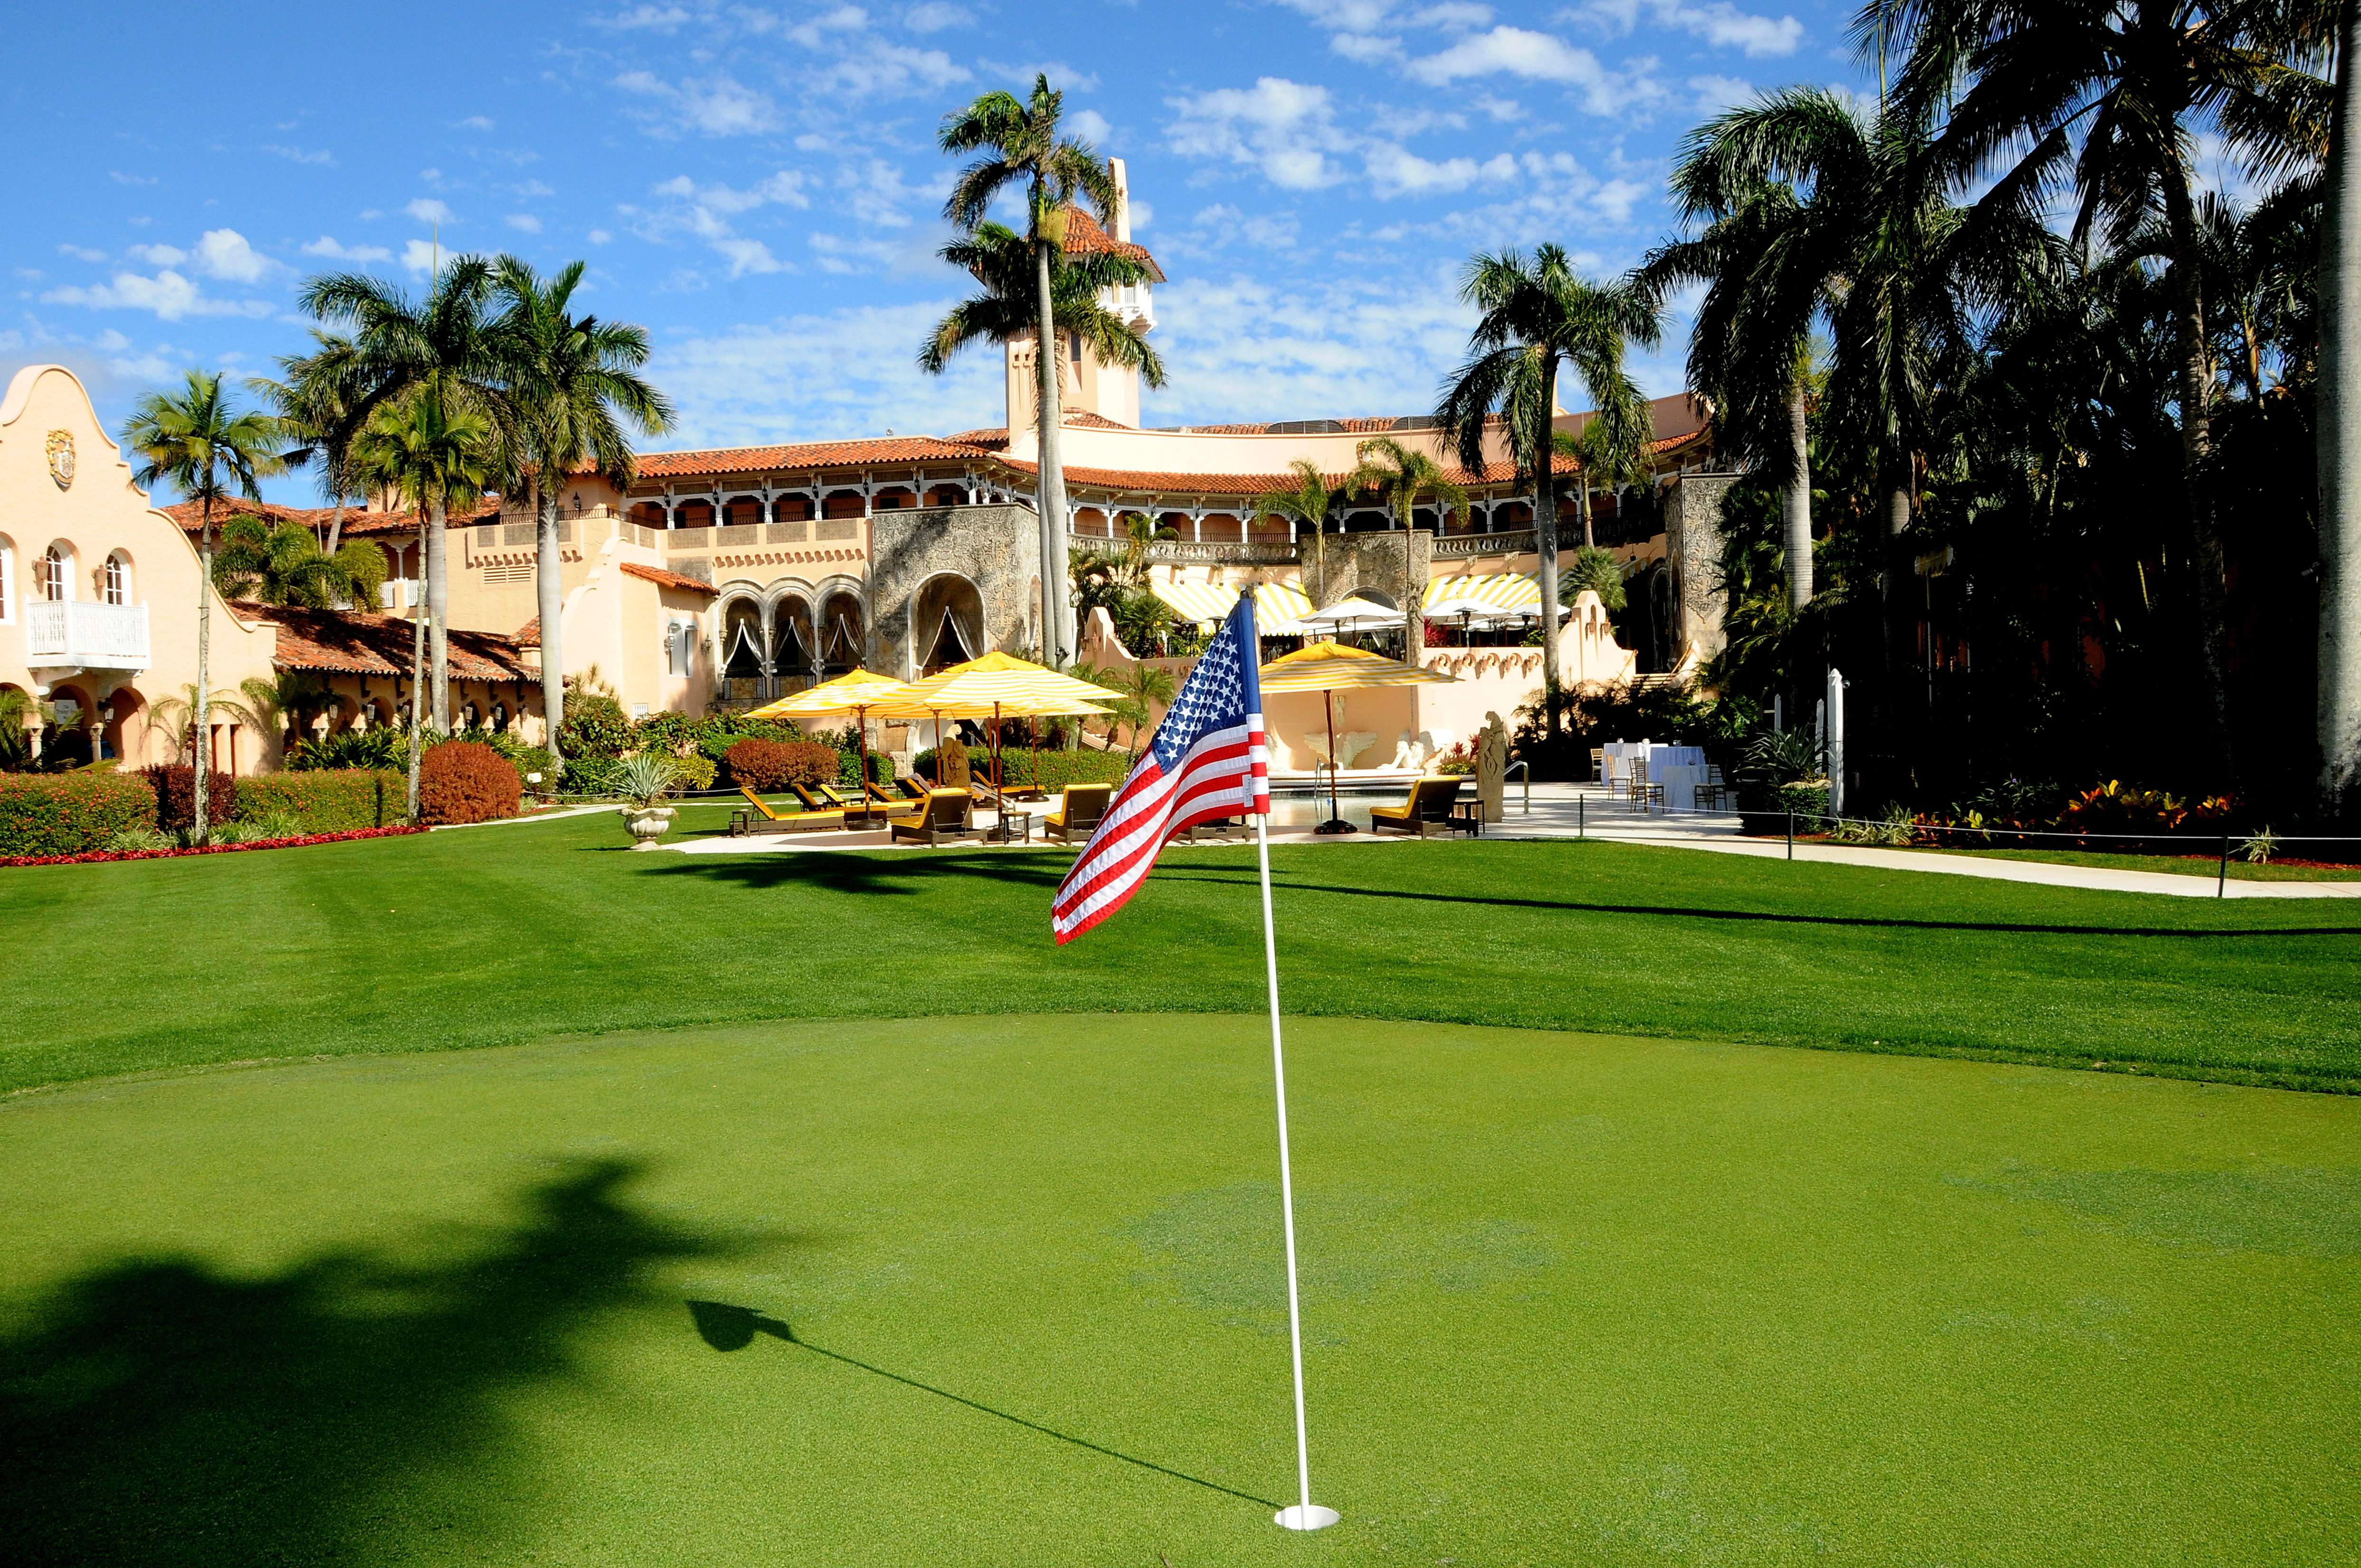 A file picture of a golf course at Donald Trump’s Mar-a-Lago estate in Palm Beach, Florida. Photo: Getty Images